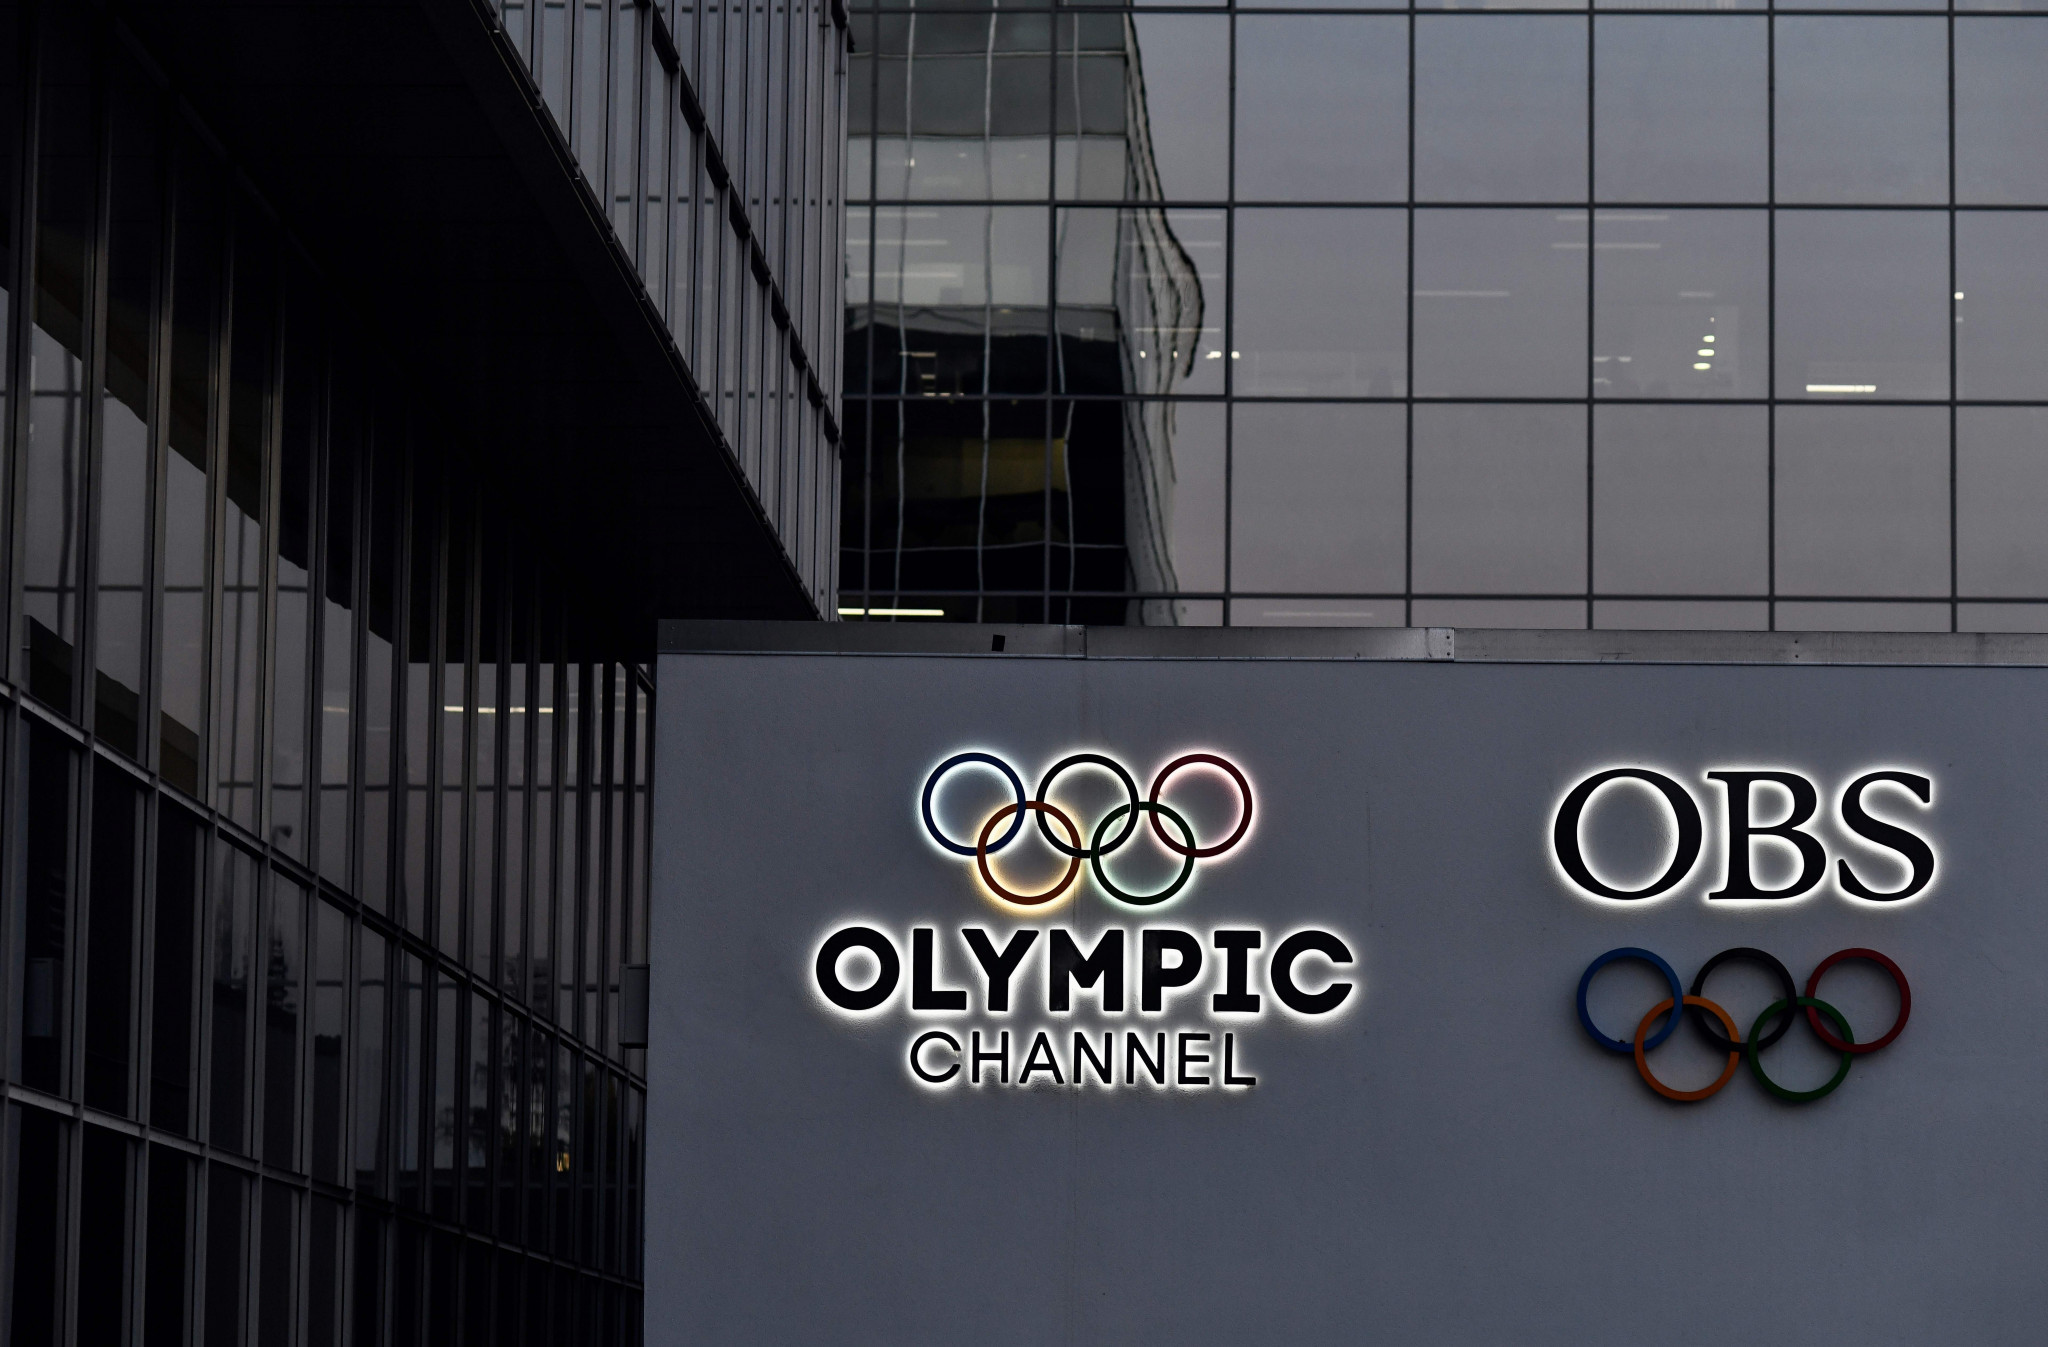 Staff working for Olympic Broadcasting Services and the Olympic Channel in Madrid have been asked to work from home ©Getty Images